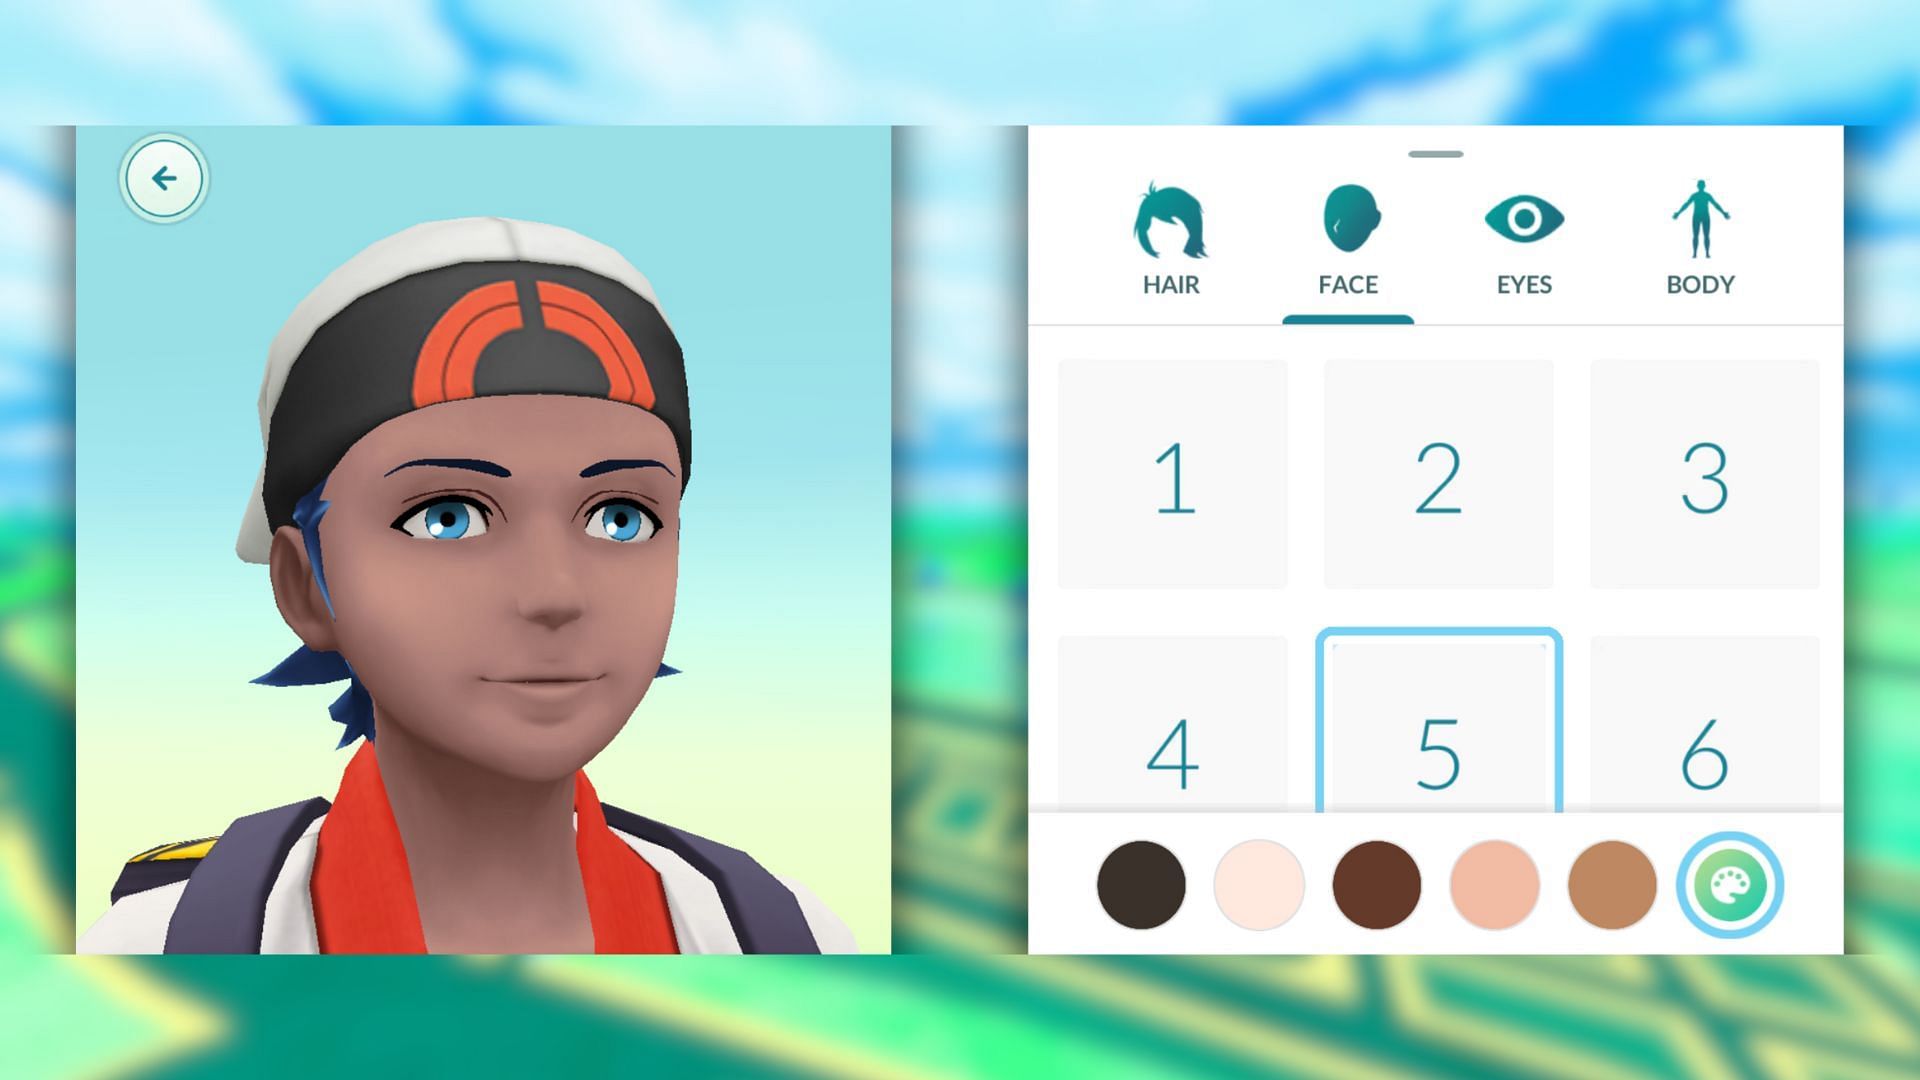 Face presets available in the game (Image via The Pokemon Company)